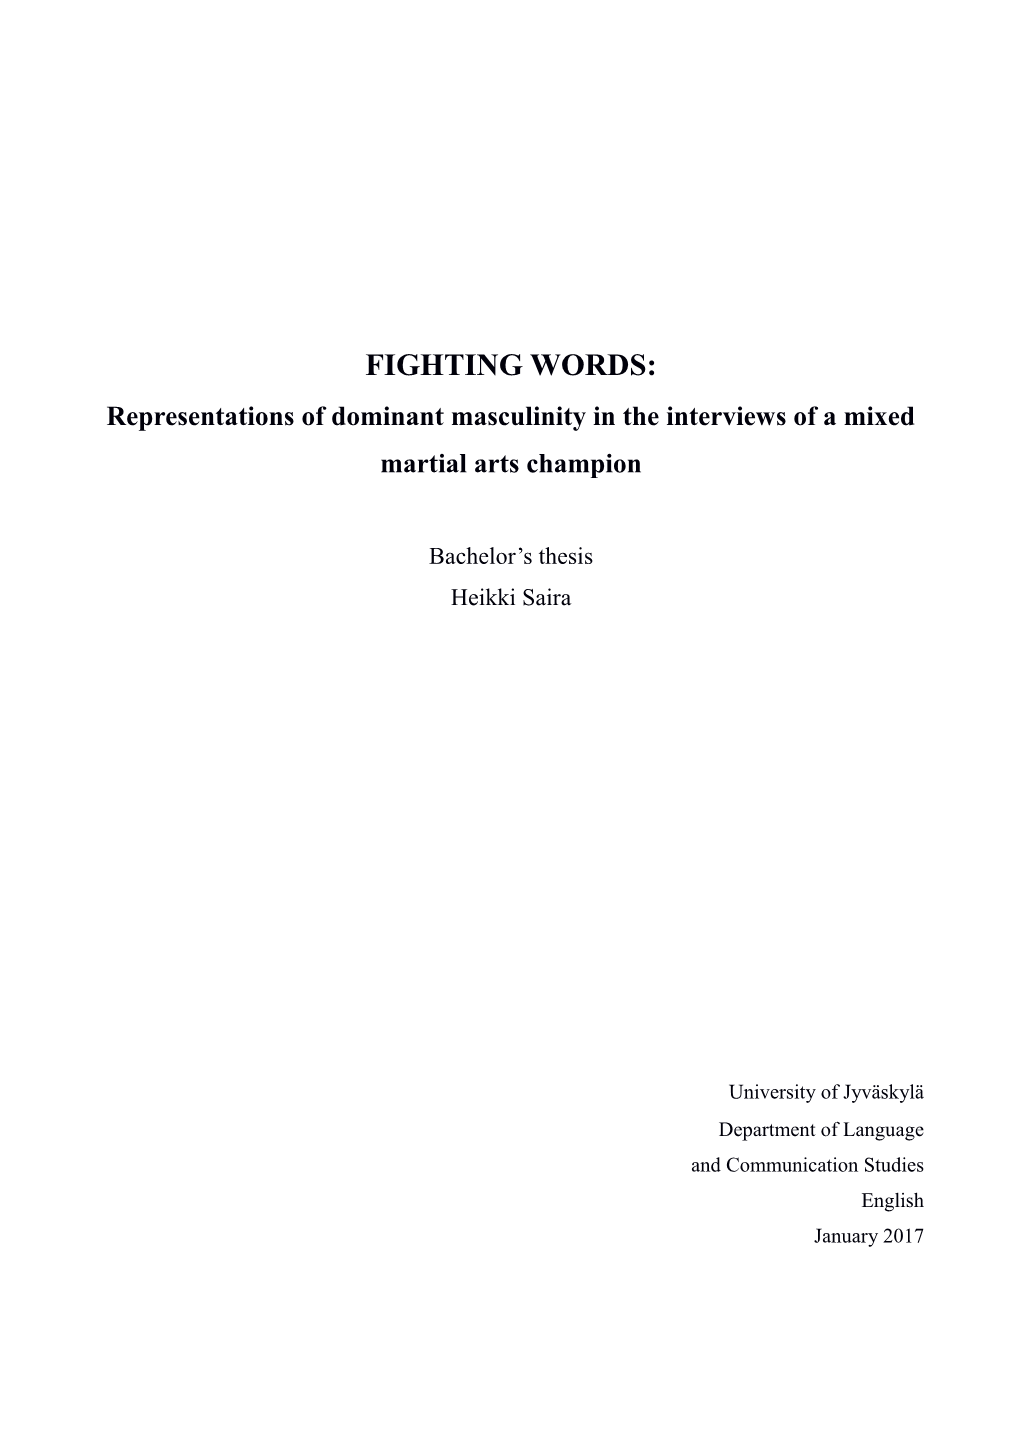 FIGHTING WORDS: Representations of Dominant Masculinity in the Interviews of a Mixed Martial Arts Champion